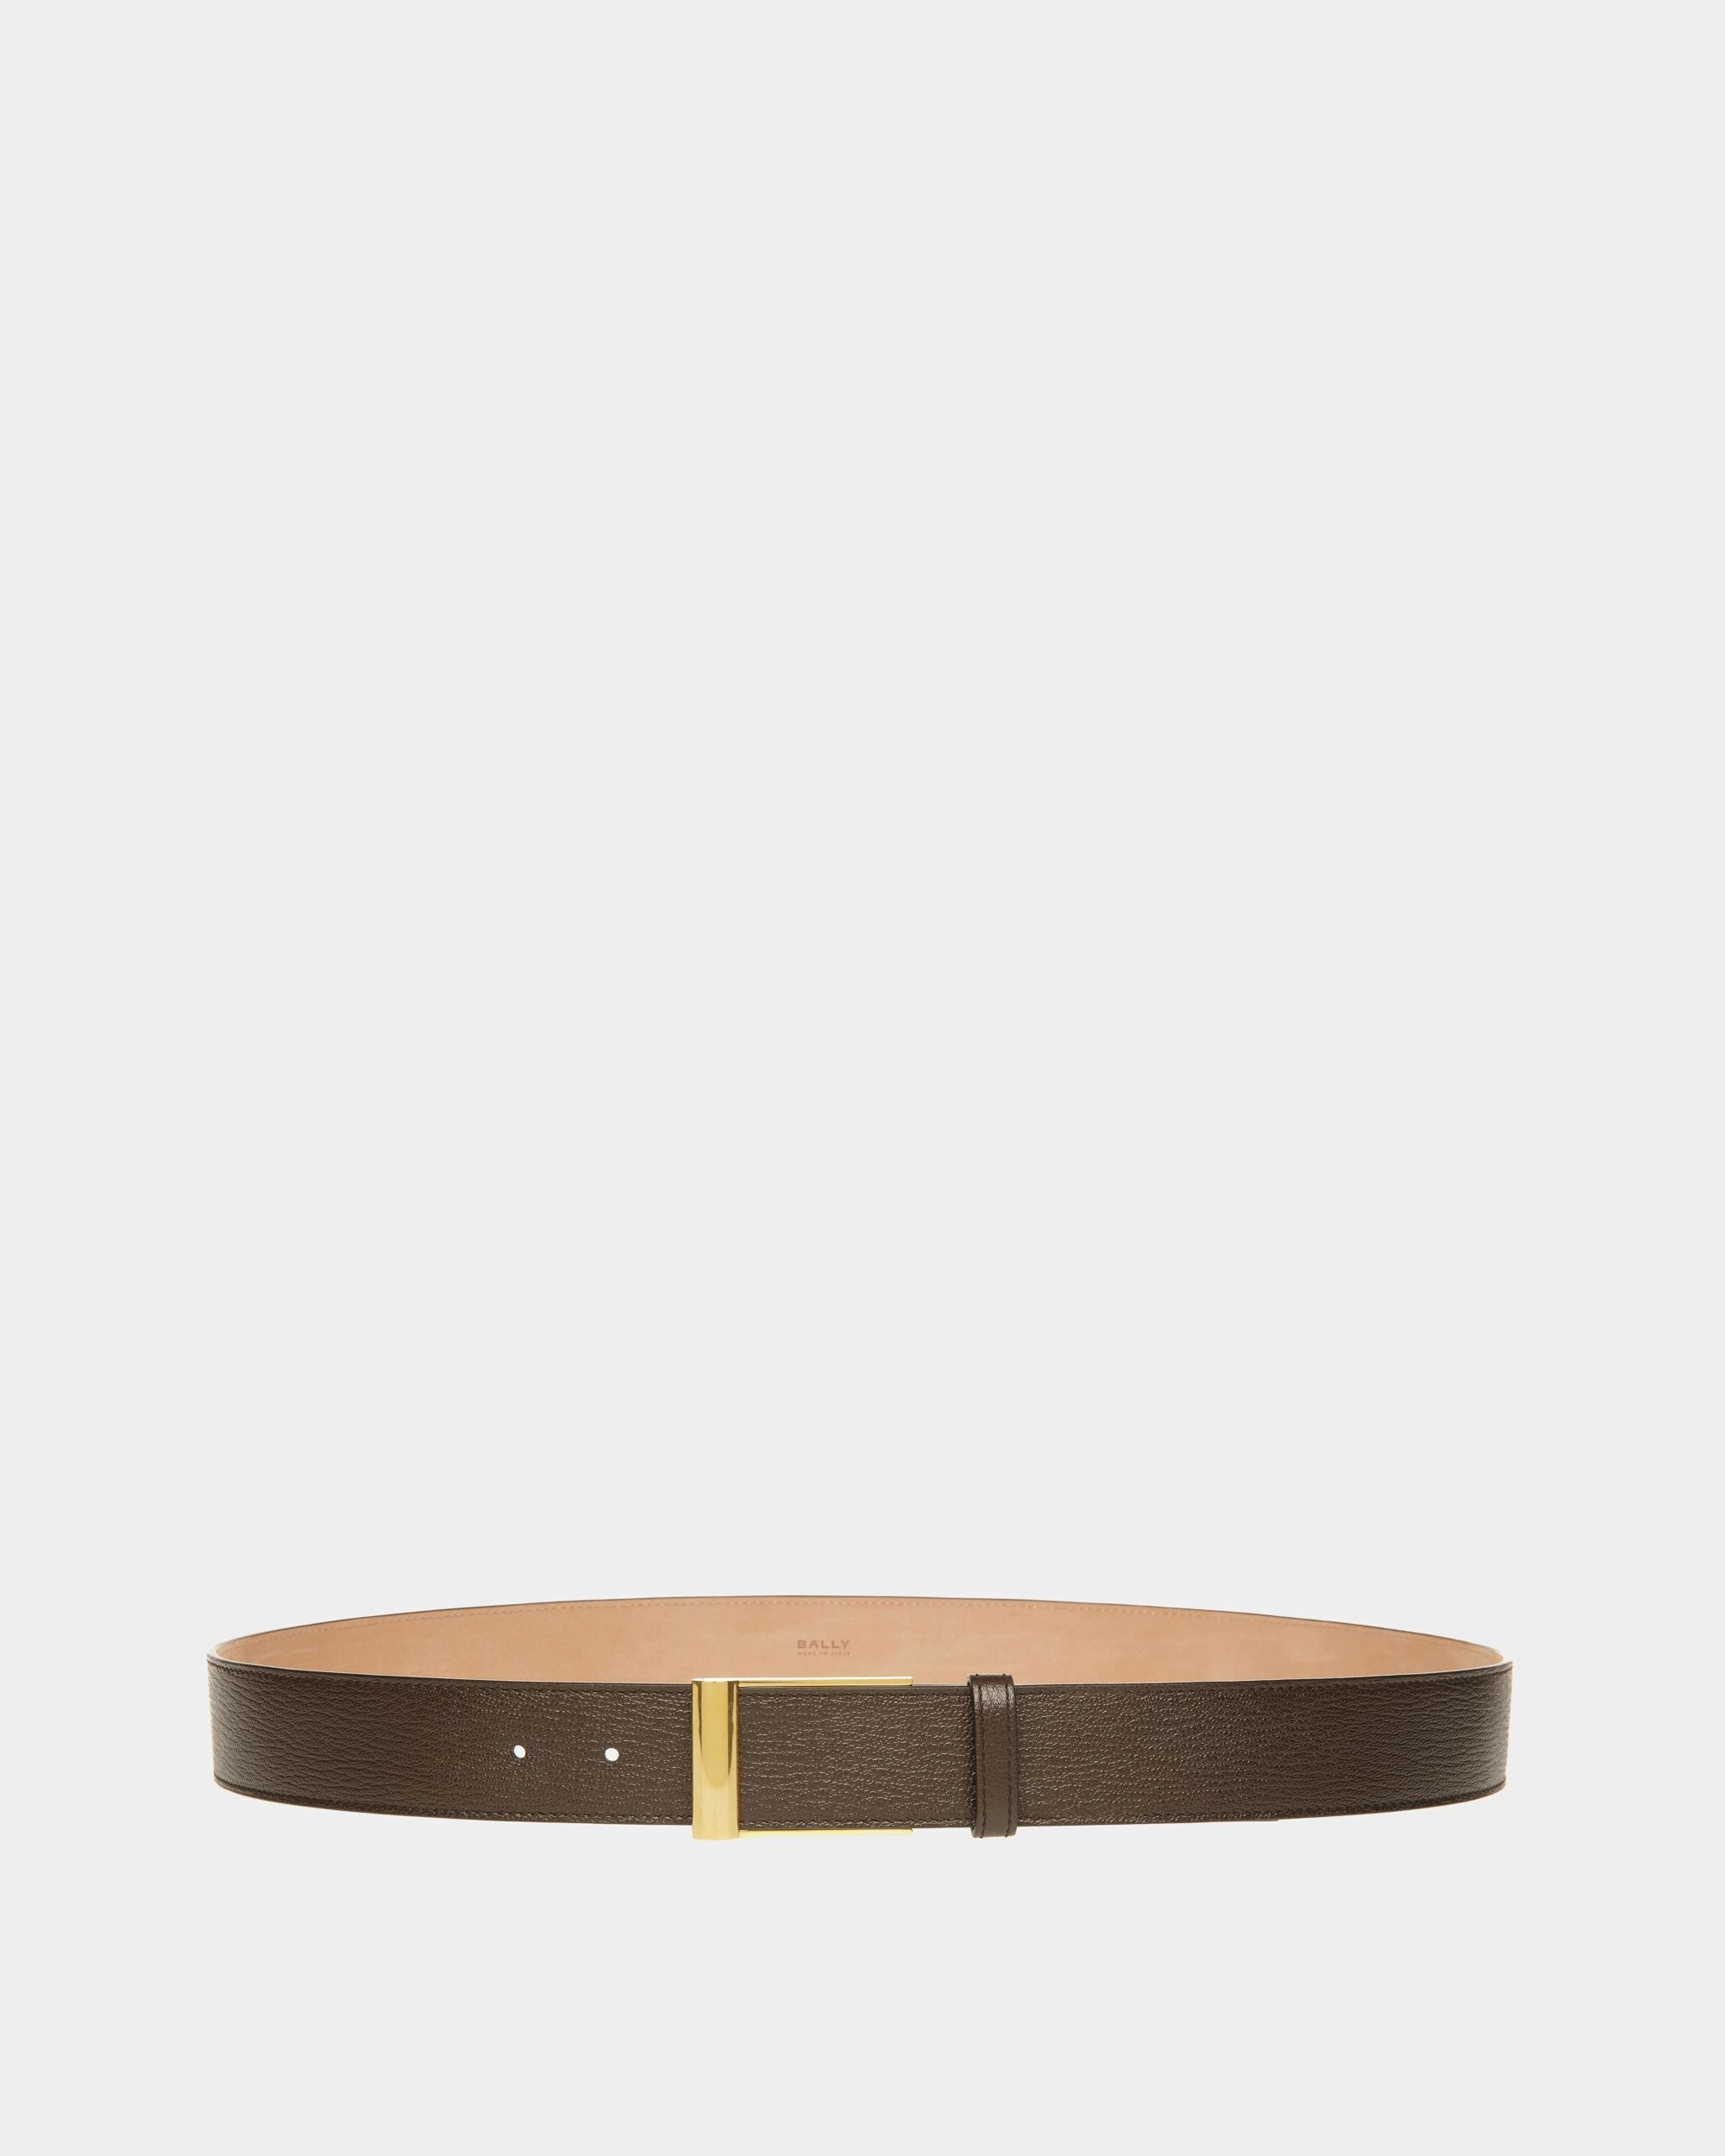 Outline 35mm | Men's Fixed Belt | Brown Leather | Bally | Still Life Front